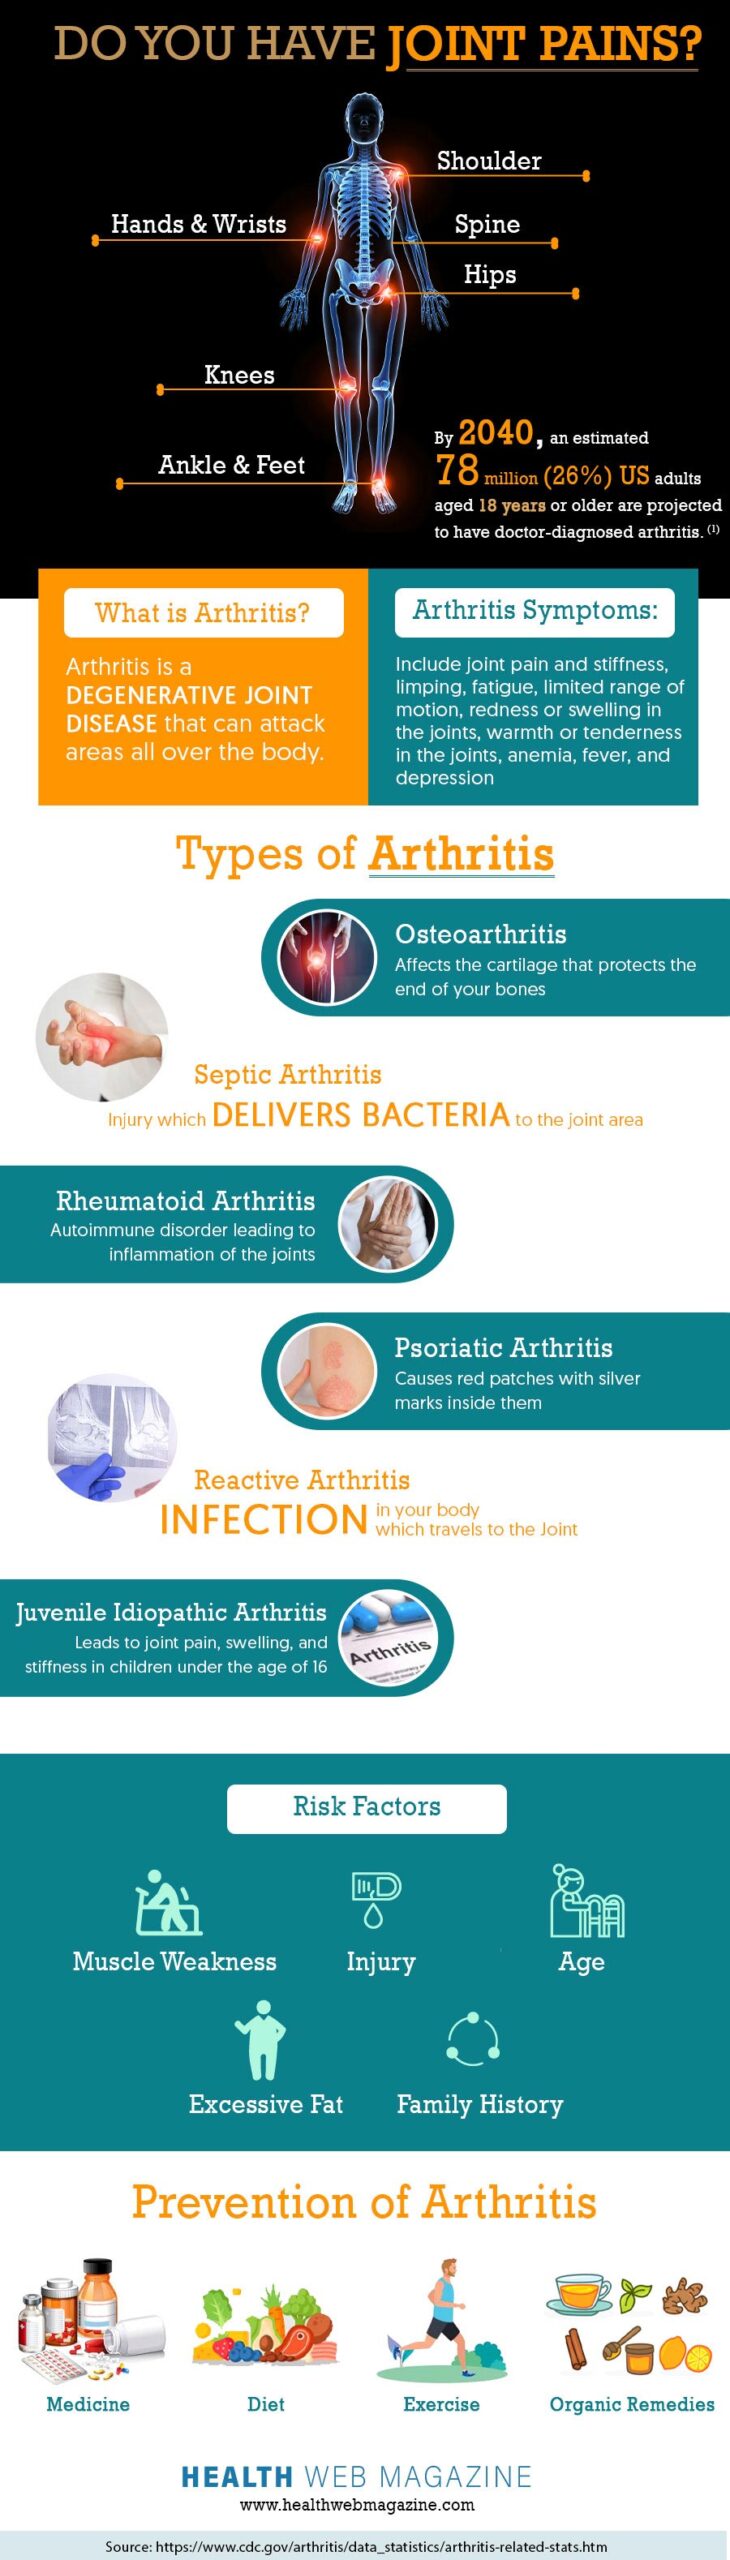 Arthritis Types and Prevention info